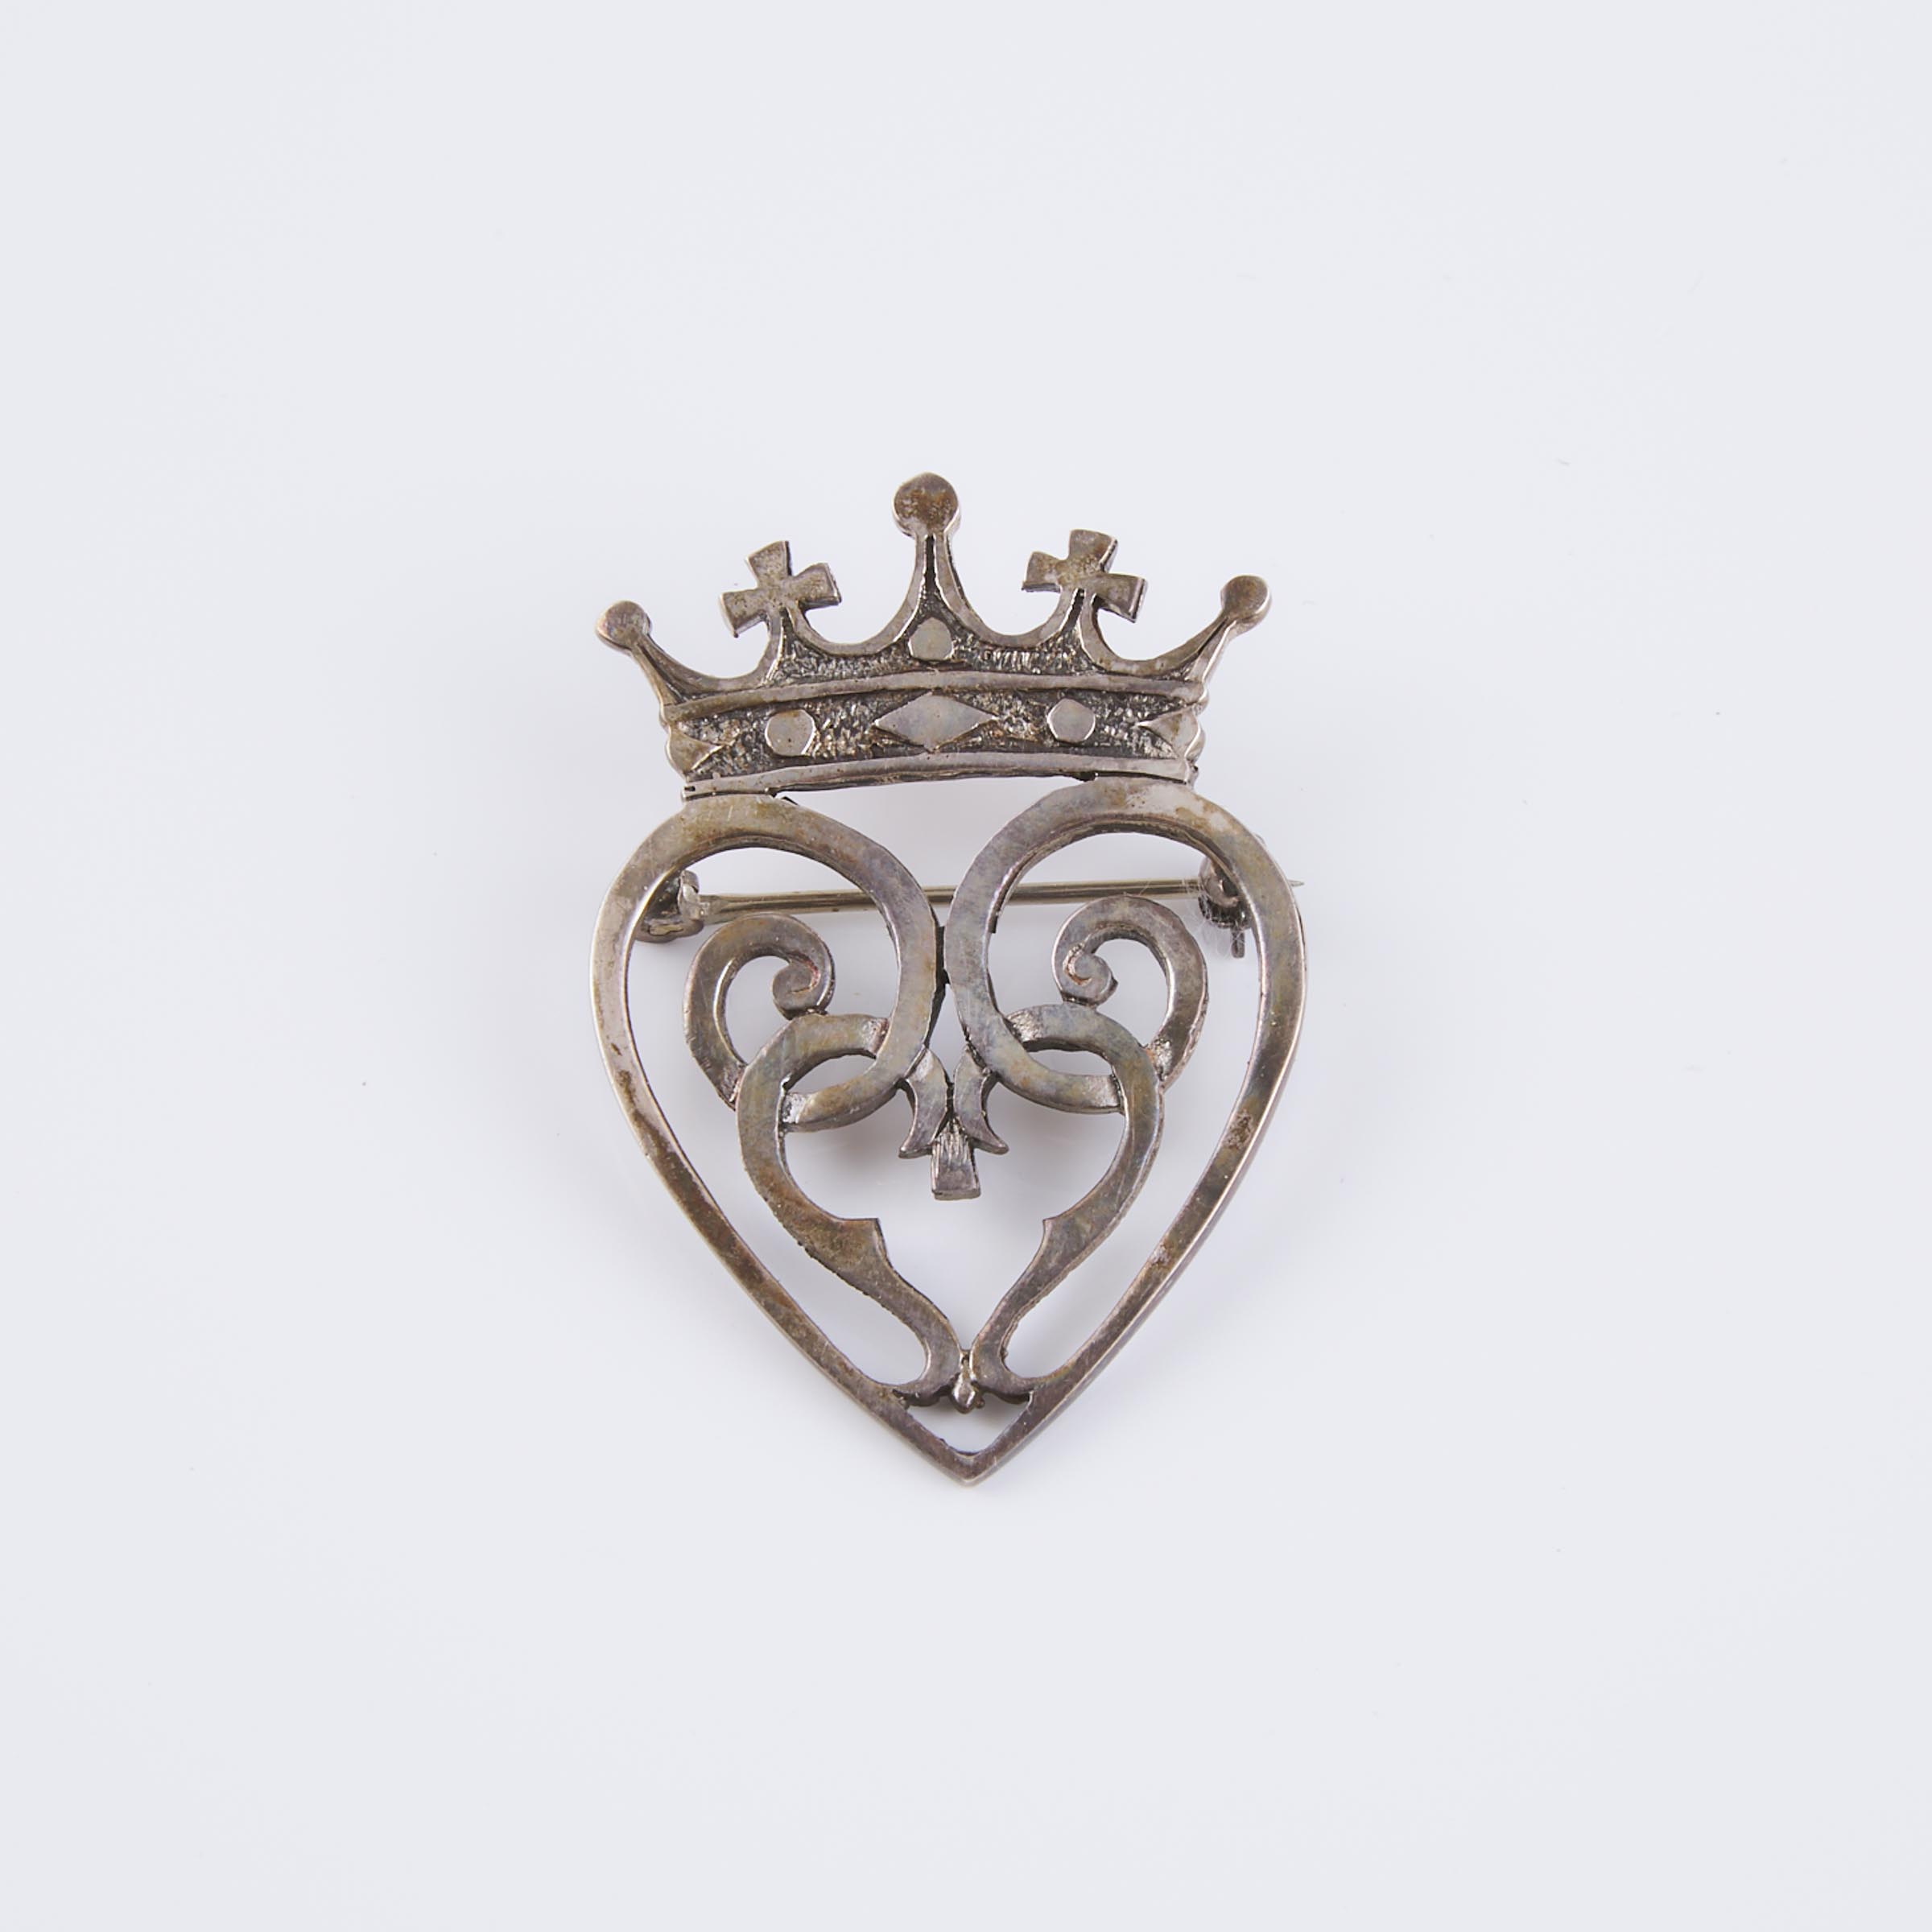 Scottish Silver 'Luckenbooth' Pin